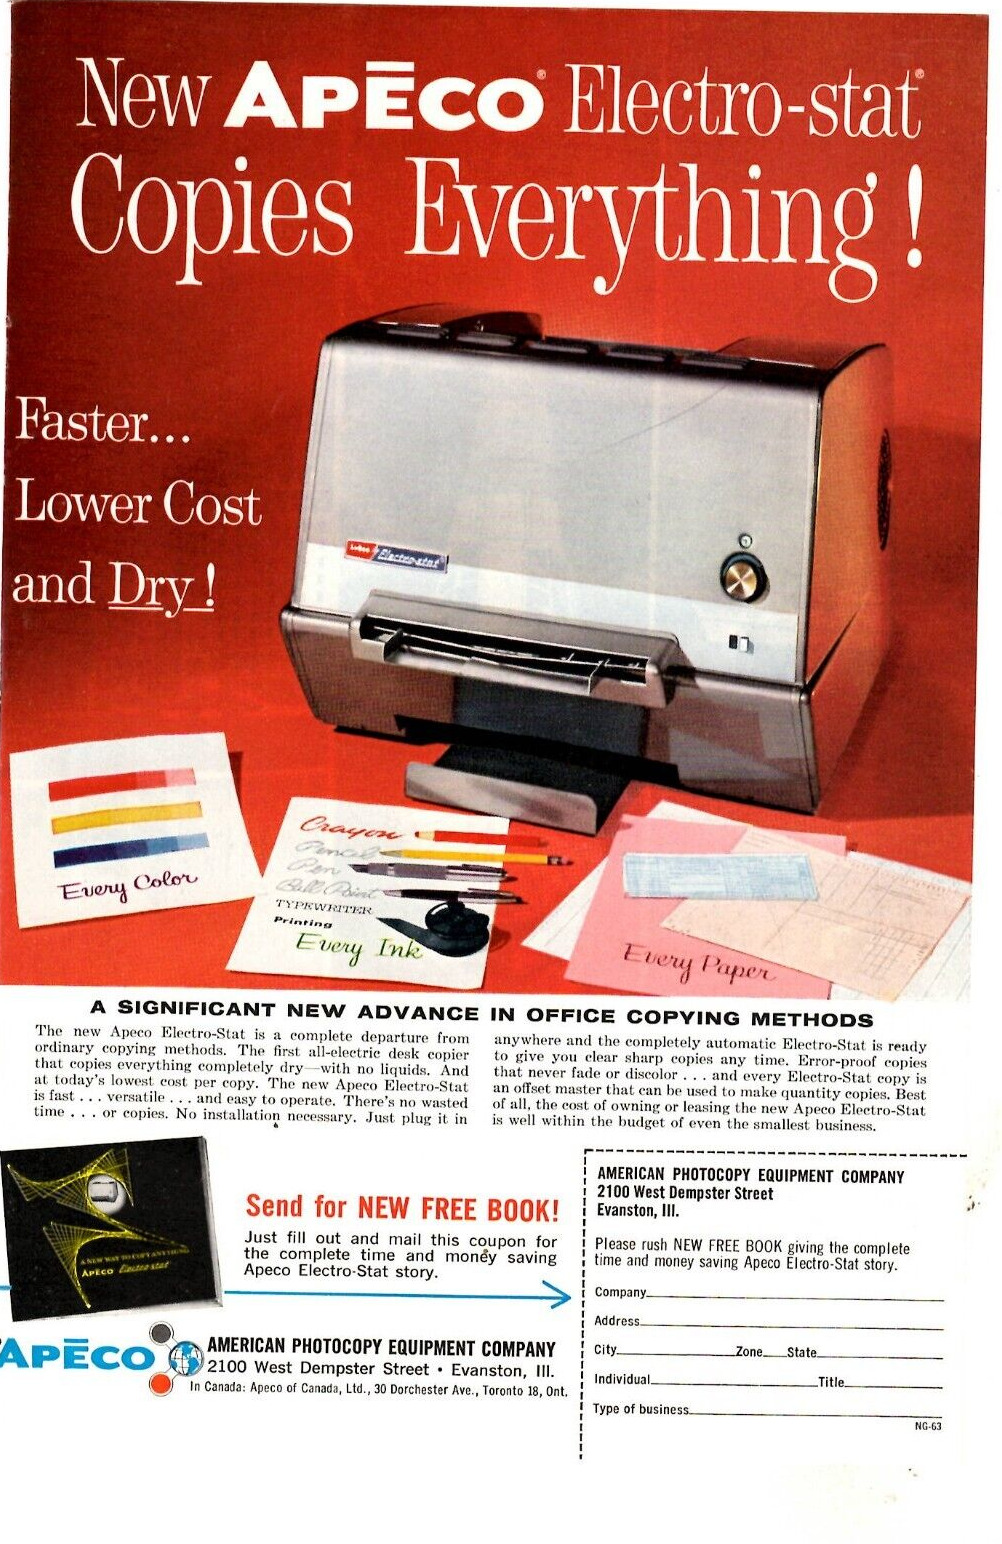 1963 Print Ad Apeco Electro-stat Copies Everything Faster lower cost and dry